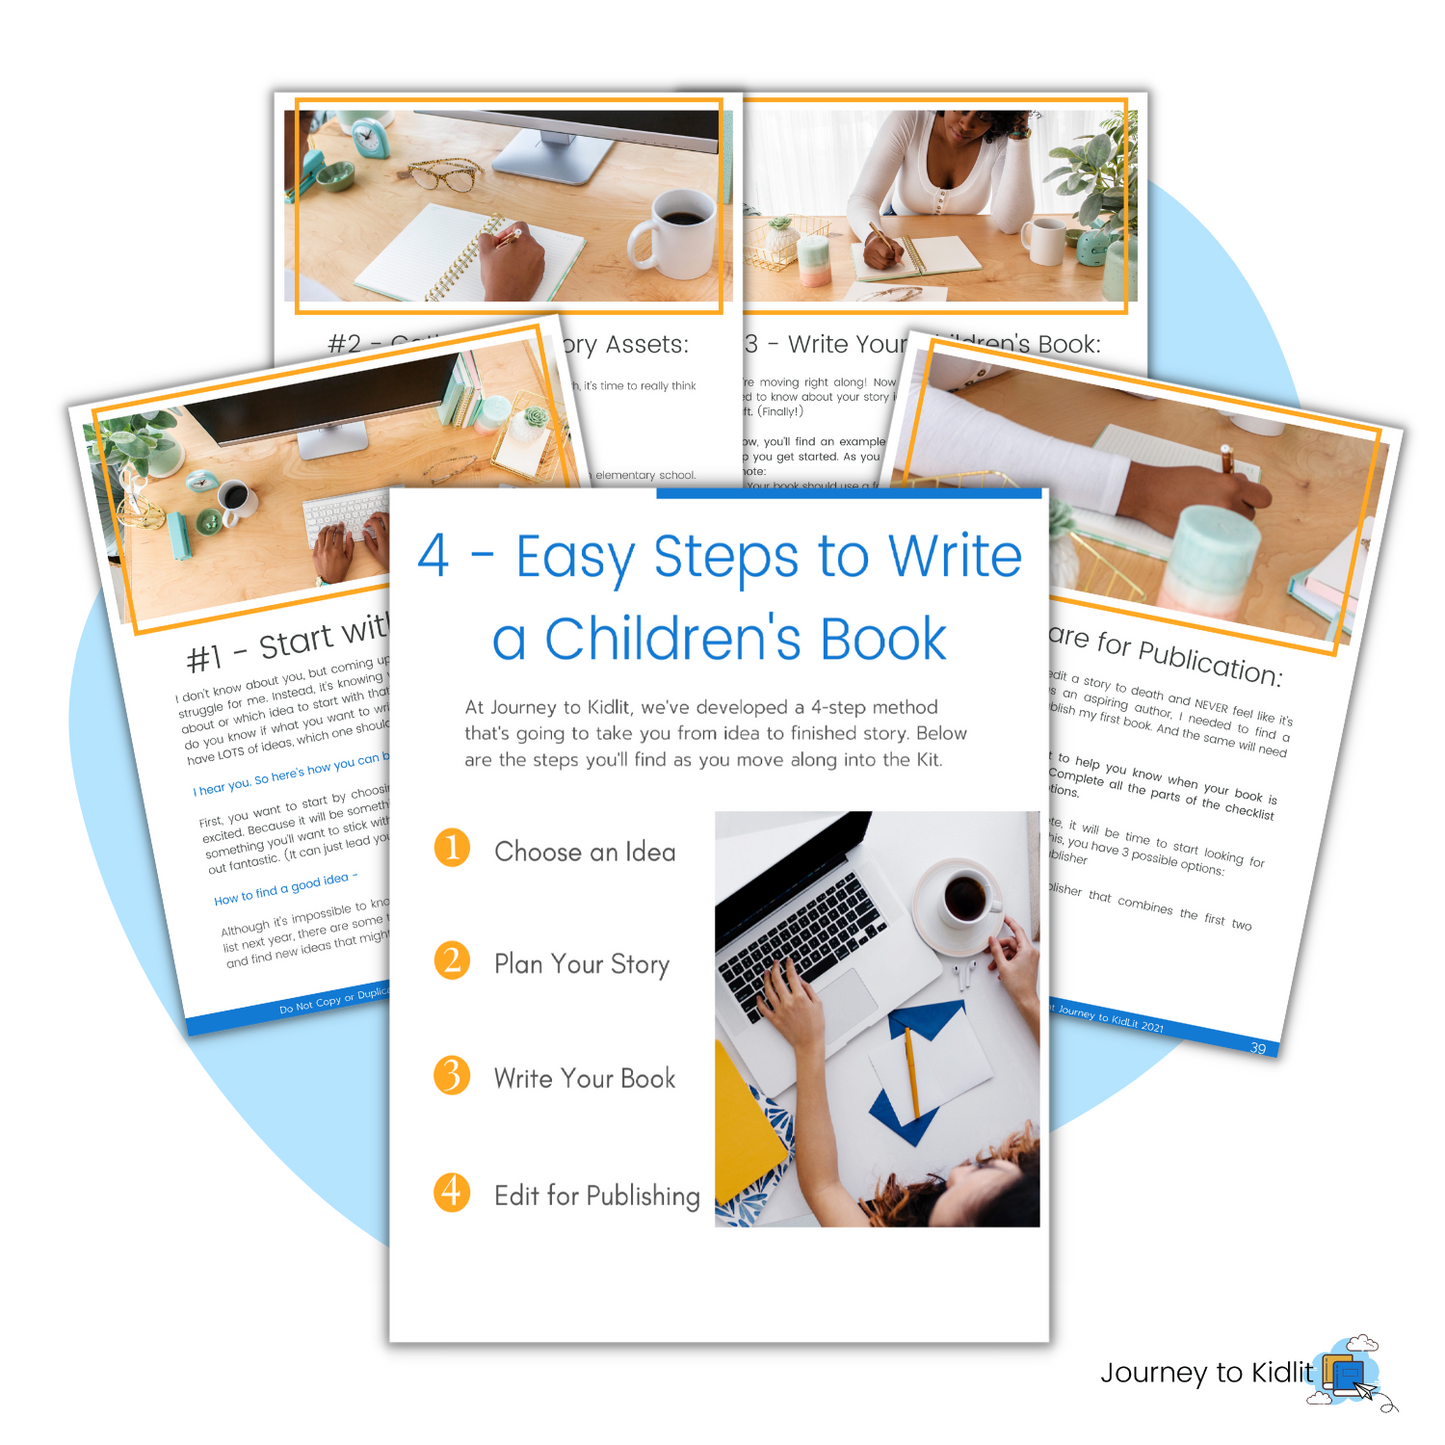 The 4-step process on how to write a children's book.